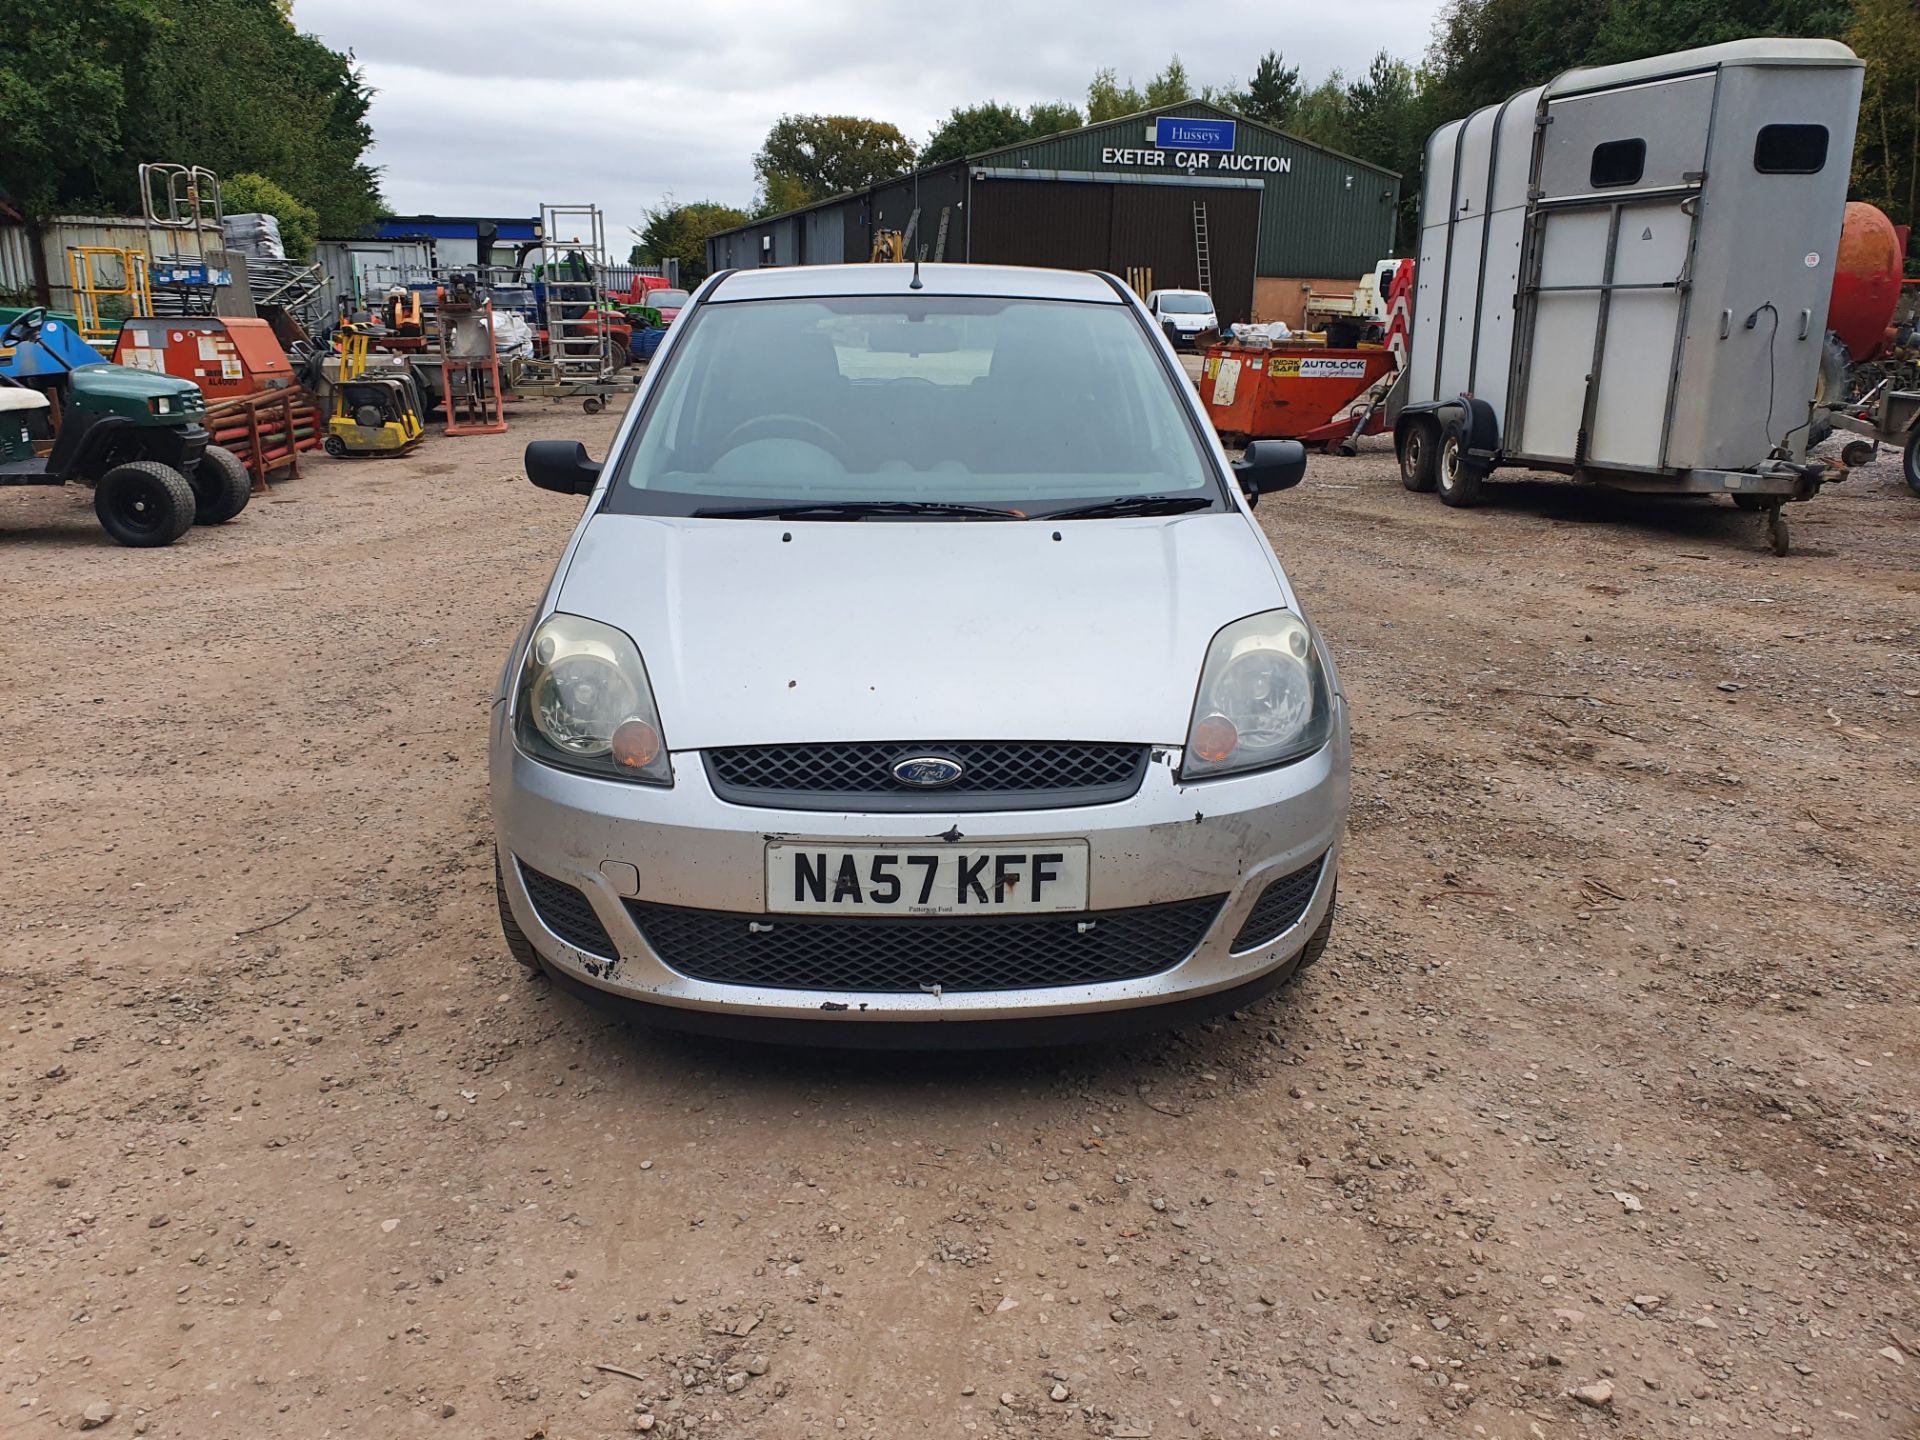 07/57 FORD FIESTA STYLE TDCI - 1399cc 5dr Hatchback (Silver) - Image 7 of 43